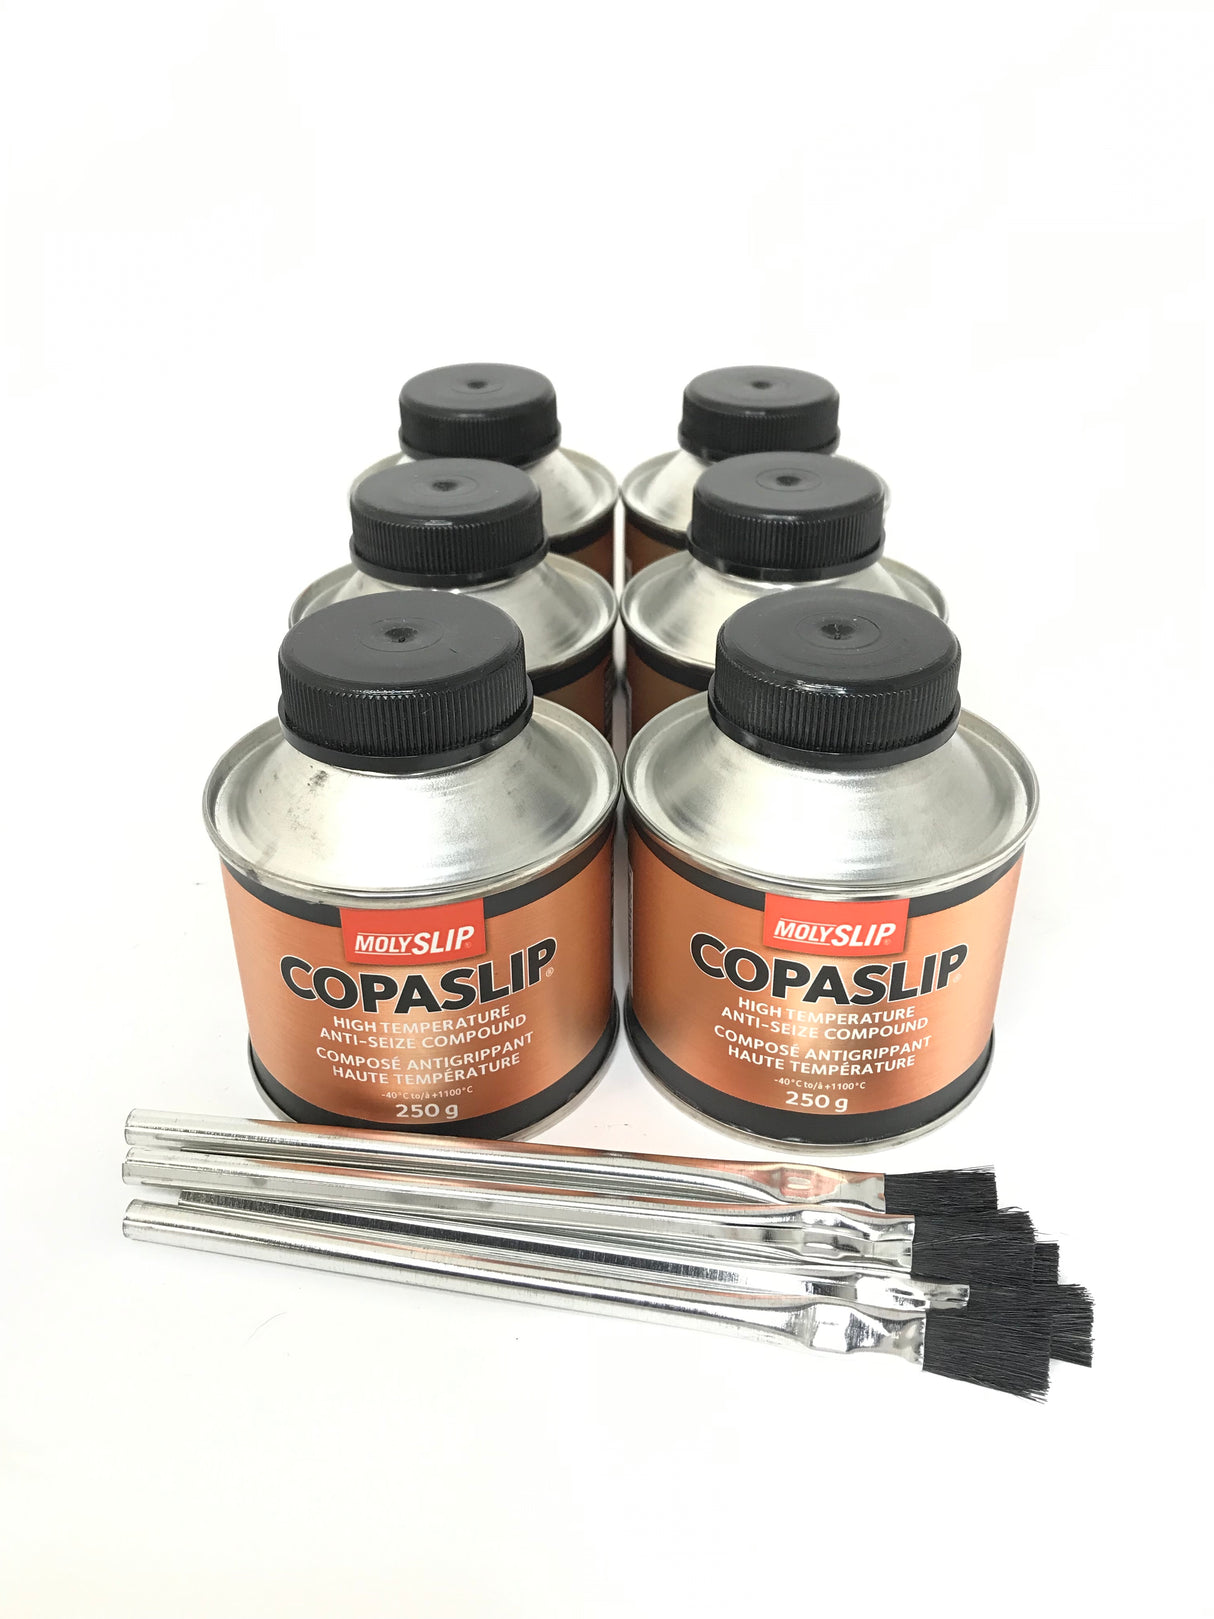 MLS 3472 Molyslip Copaslip Anti Seize Assembly Compound Grease 250g - 6 PACK